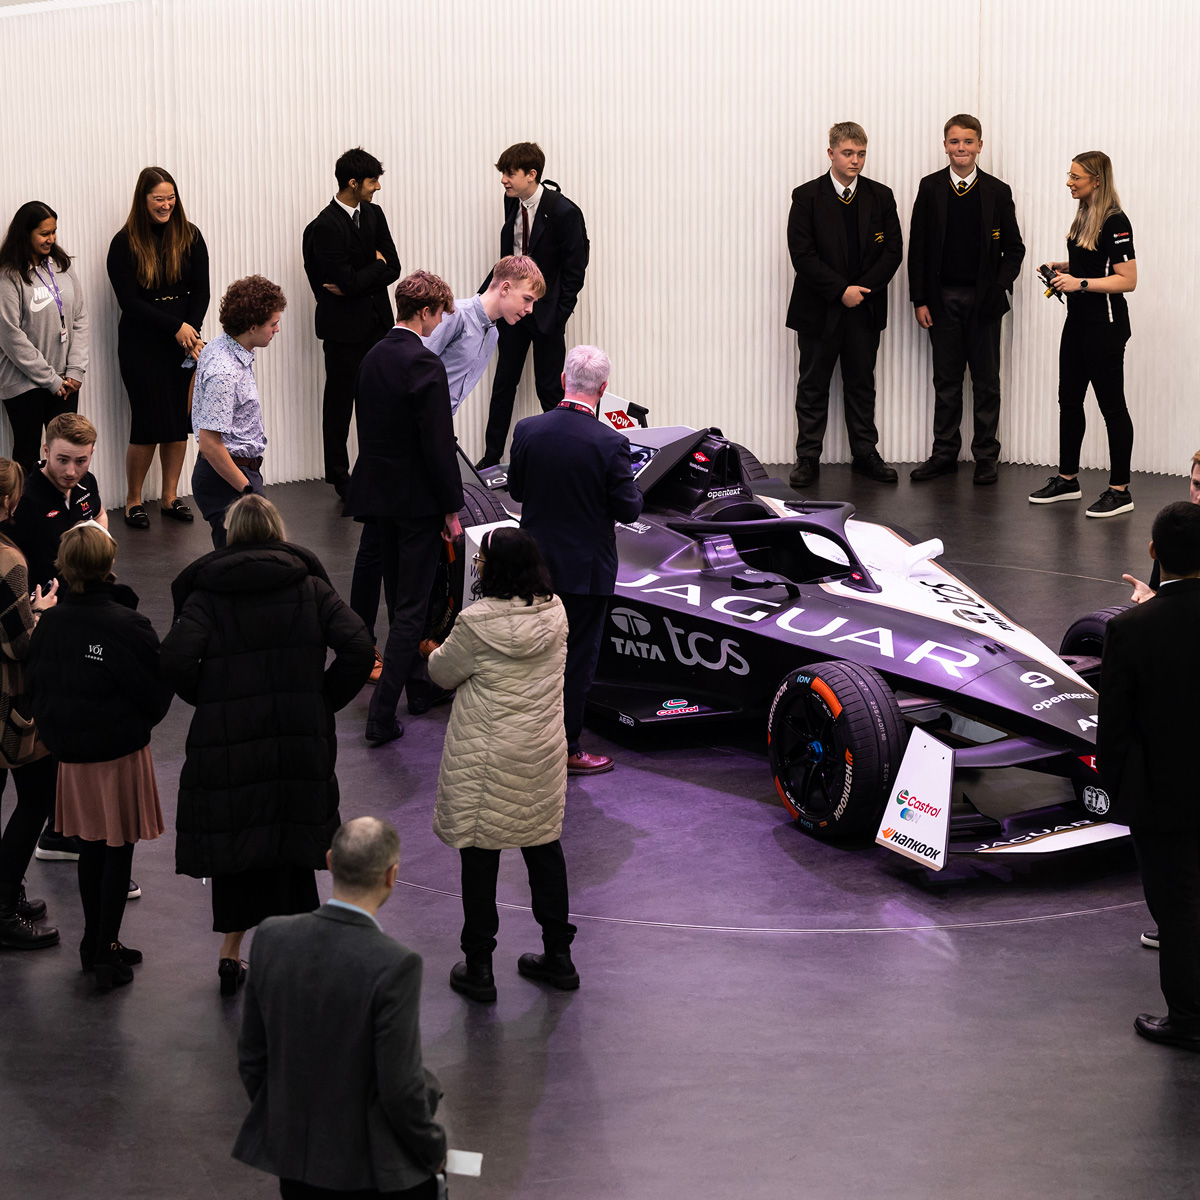 Interested in the engineering behind racing? Join in with @LifeatJLR at The #BigBangFair! Interact with iconic products and engage in fun and hands-on activities. Book your free tickets: bit.ly/4aI7fnU